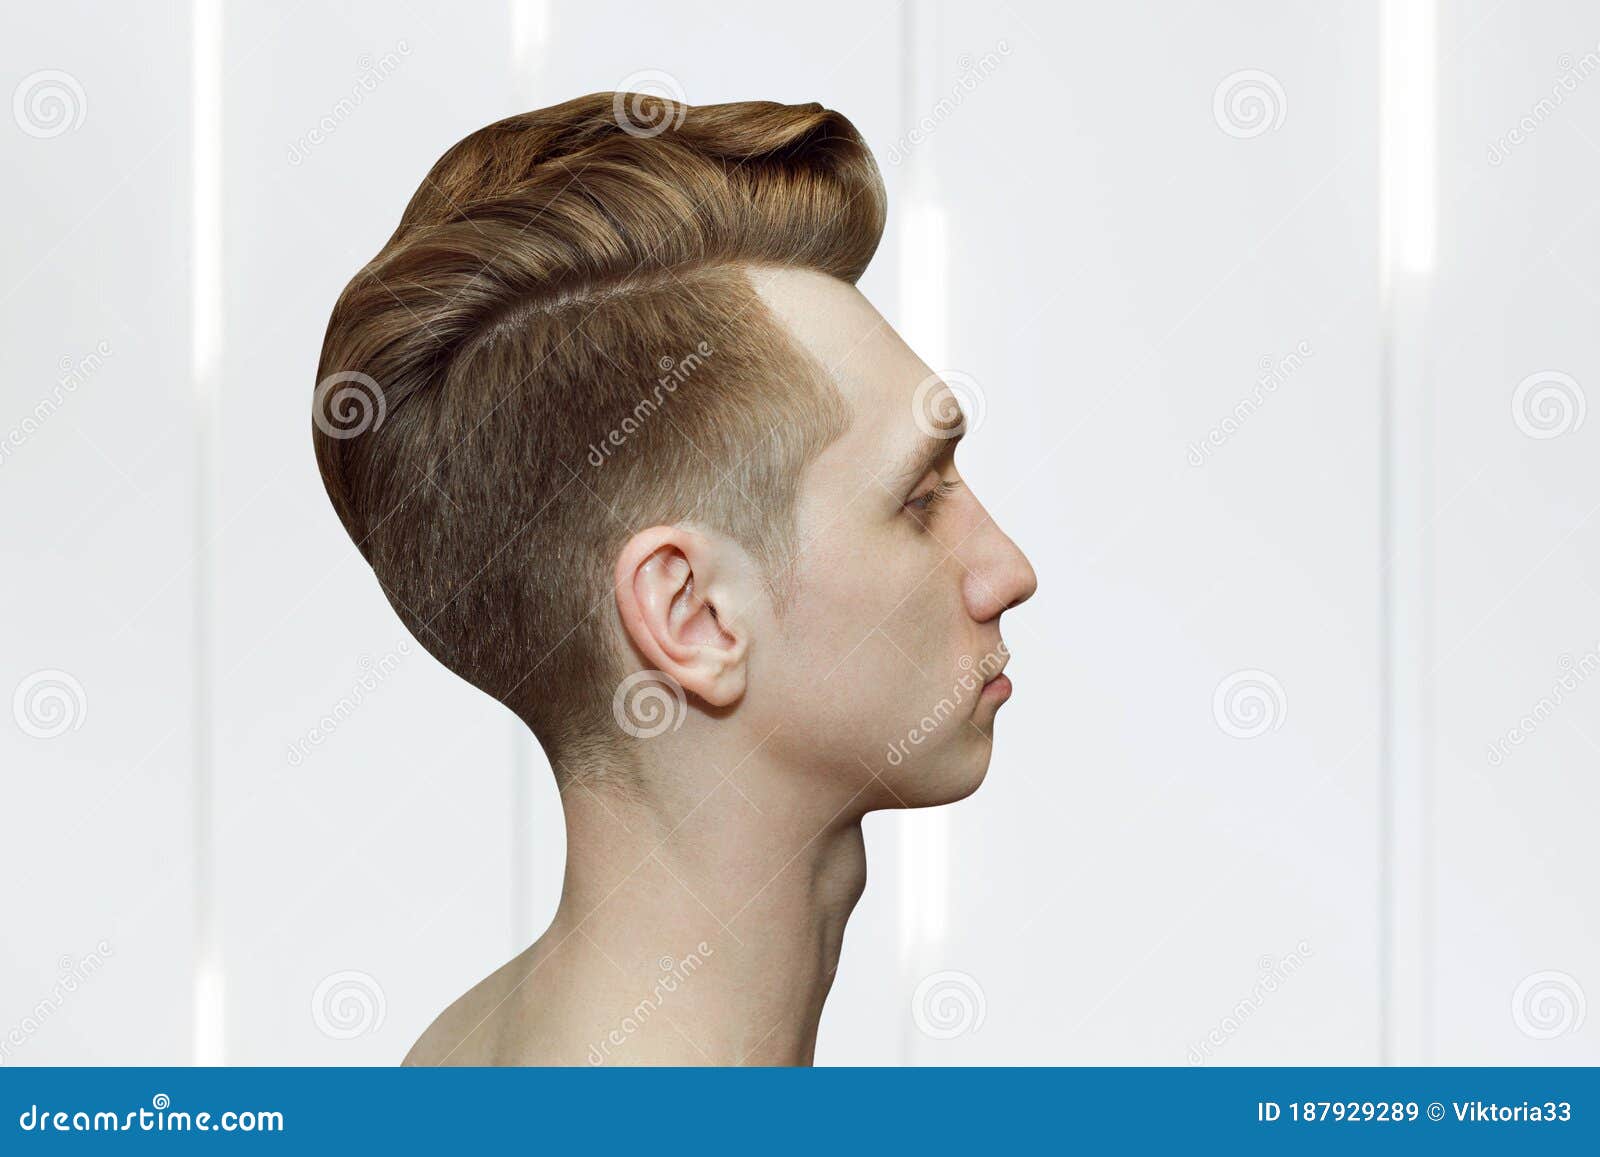 Young Ginger Guy With Pompadour Haircut Real Photo Hair For Barbershop Old Fashioned Stock Image Image Of Face Elegance 187929289